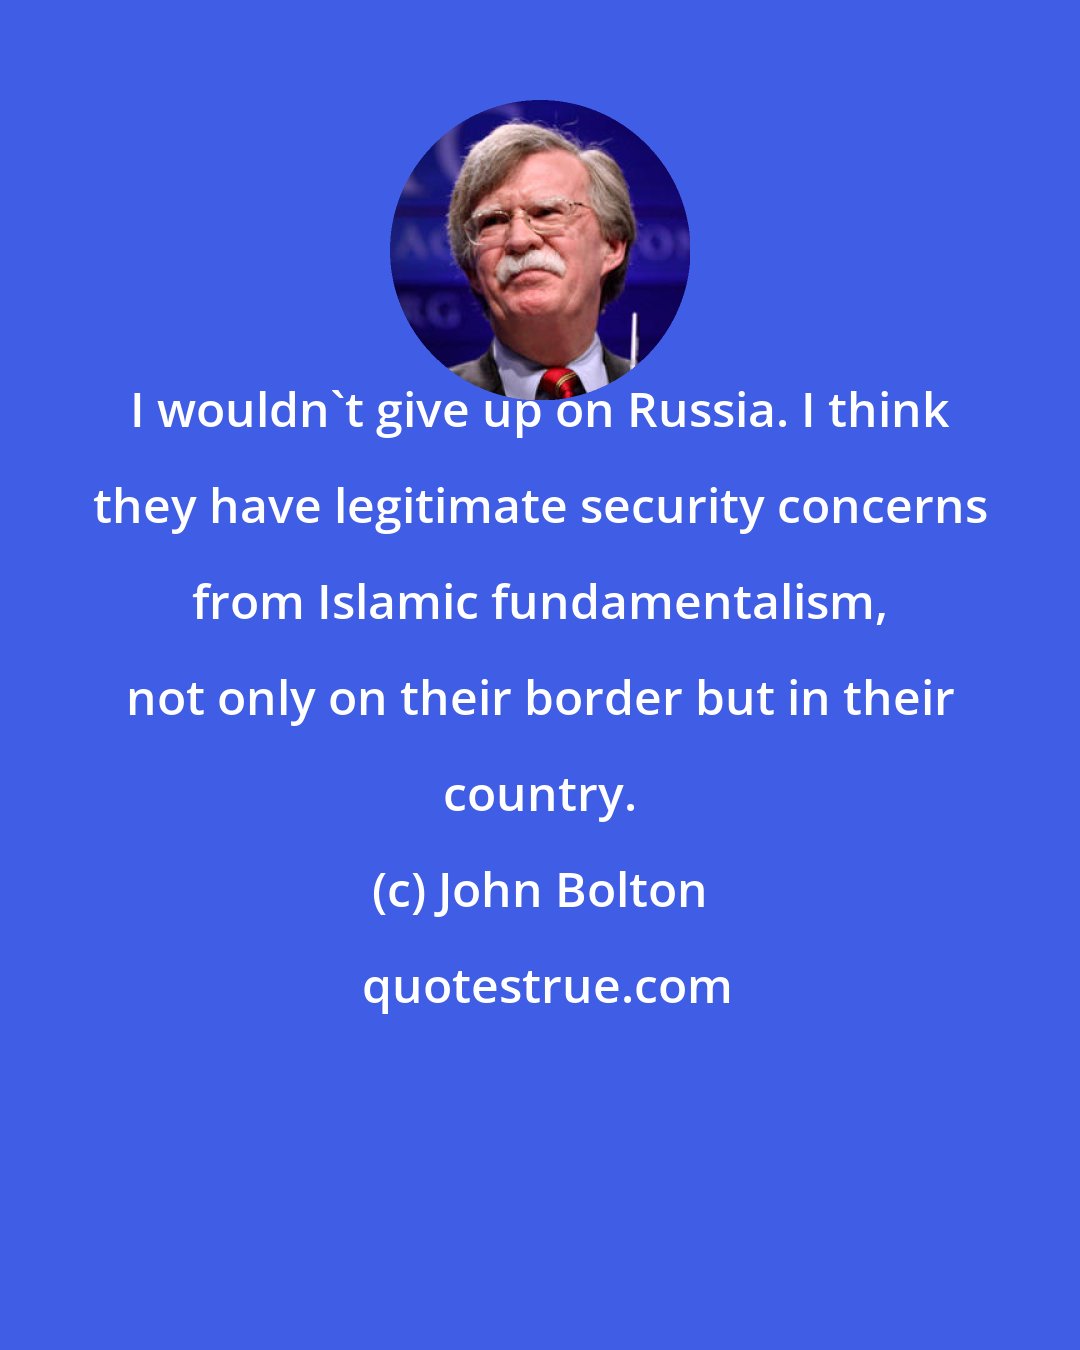 John Bolton: I wouldn't give up on Russia. I think they have legitimate security concerns from Islamic fundamentalism, not only on their border but in their country.